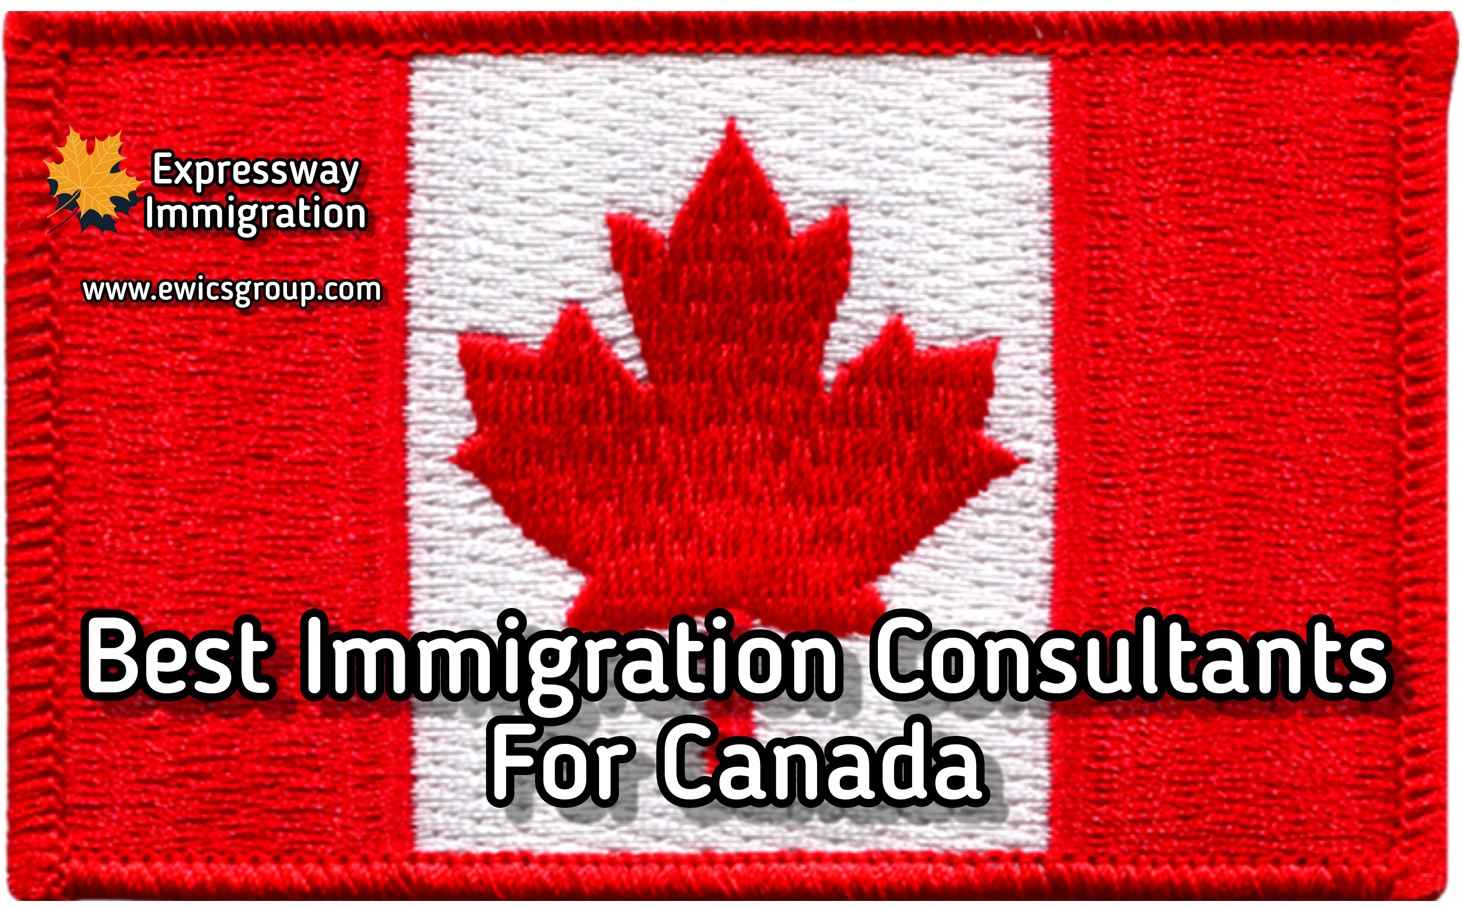 Best Immigration Consultants for Canada